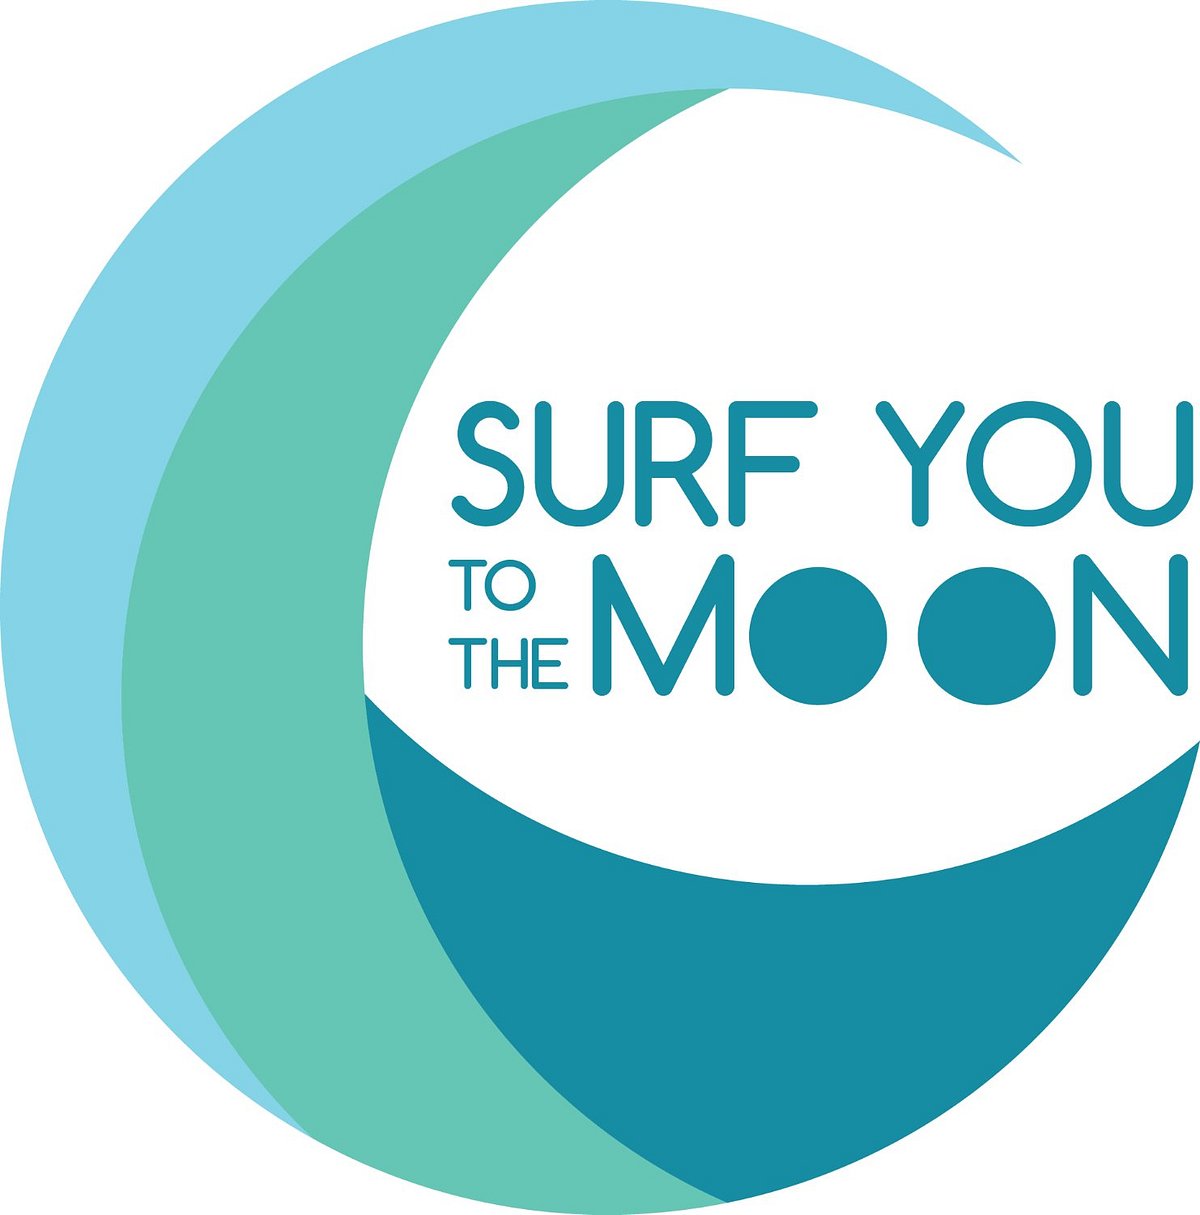 Surf You To The Moon Stateline All You Need To Know Before You Go